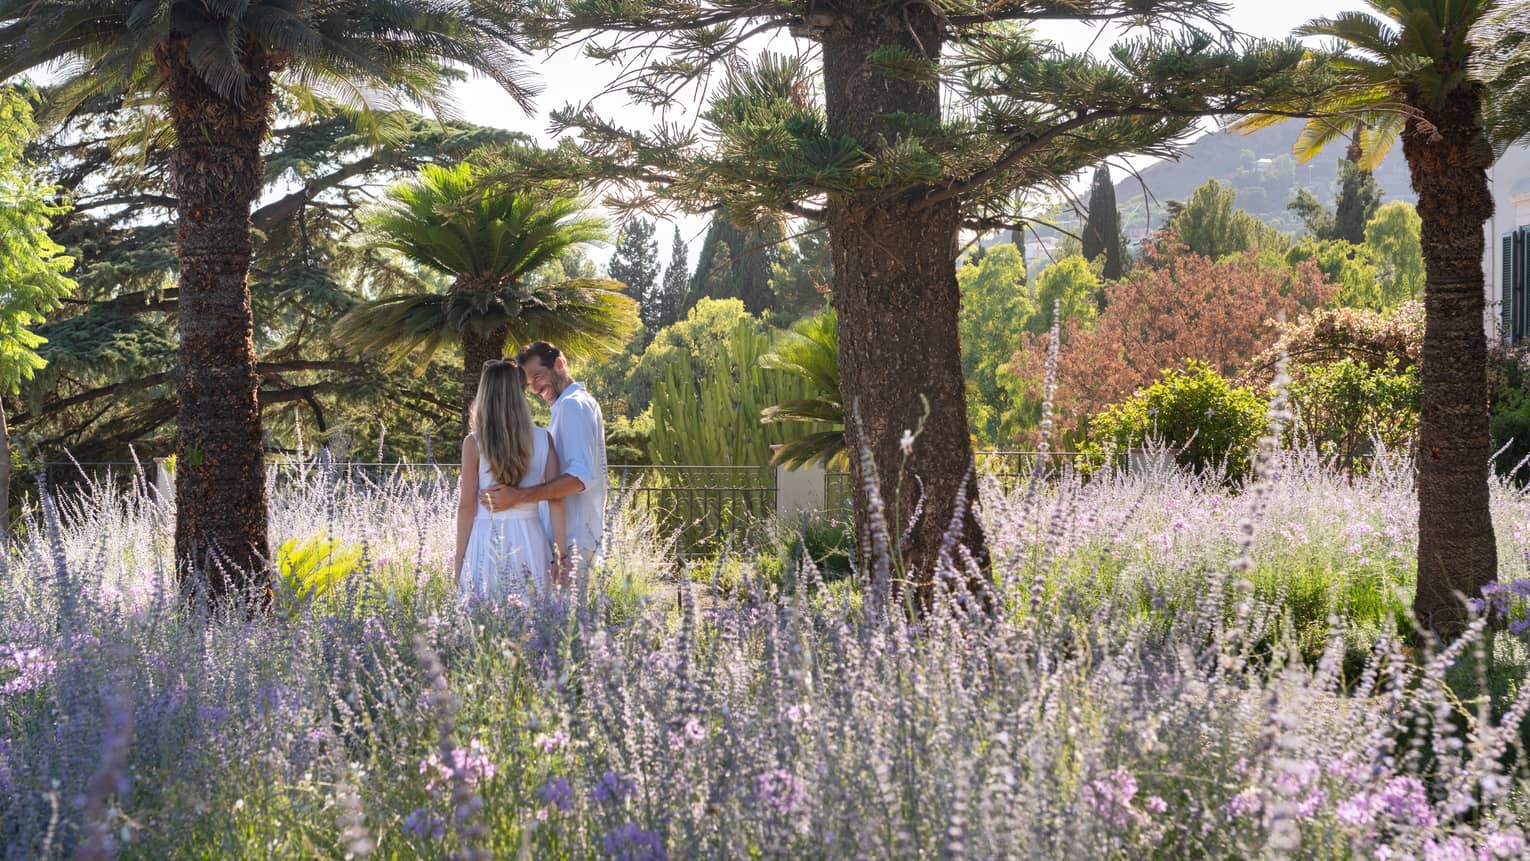 Couple walks through field of lavender flowers flanked by palm trees